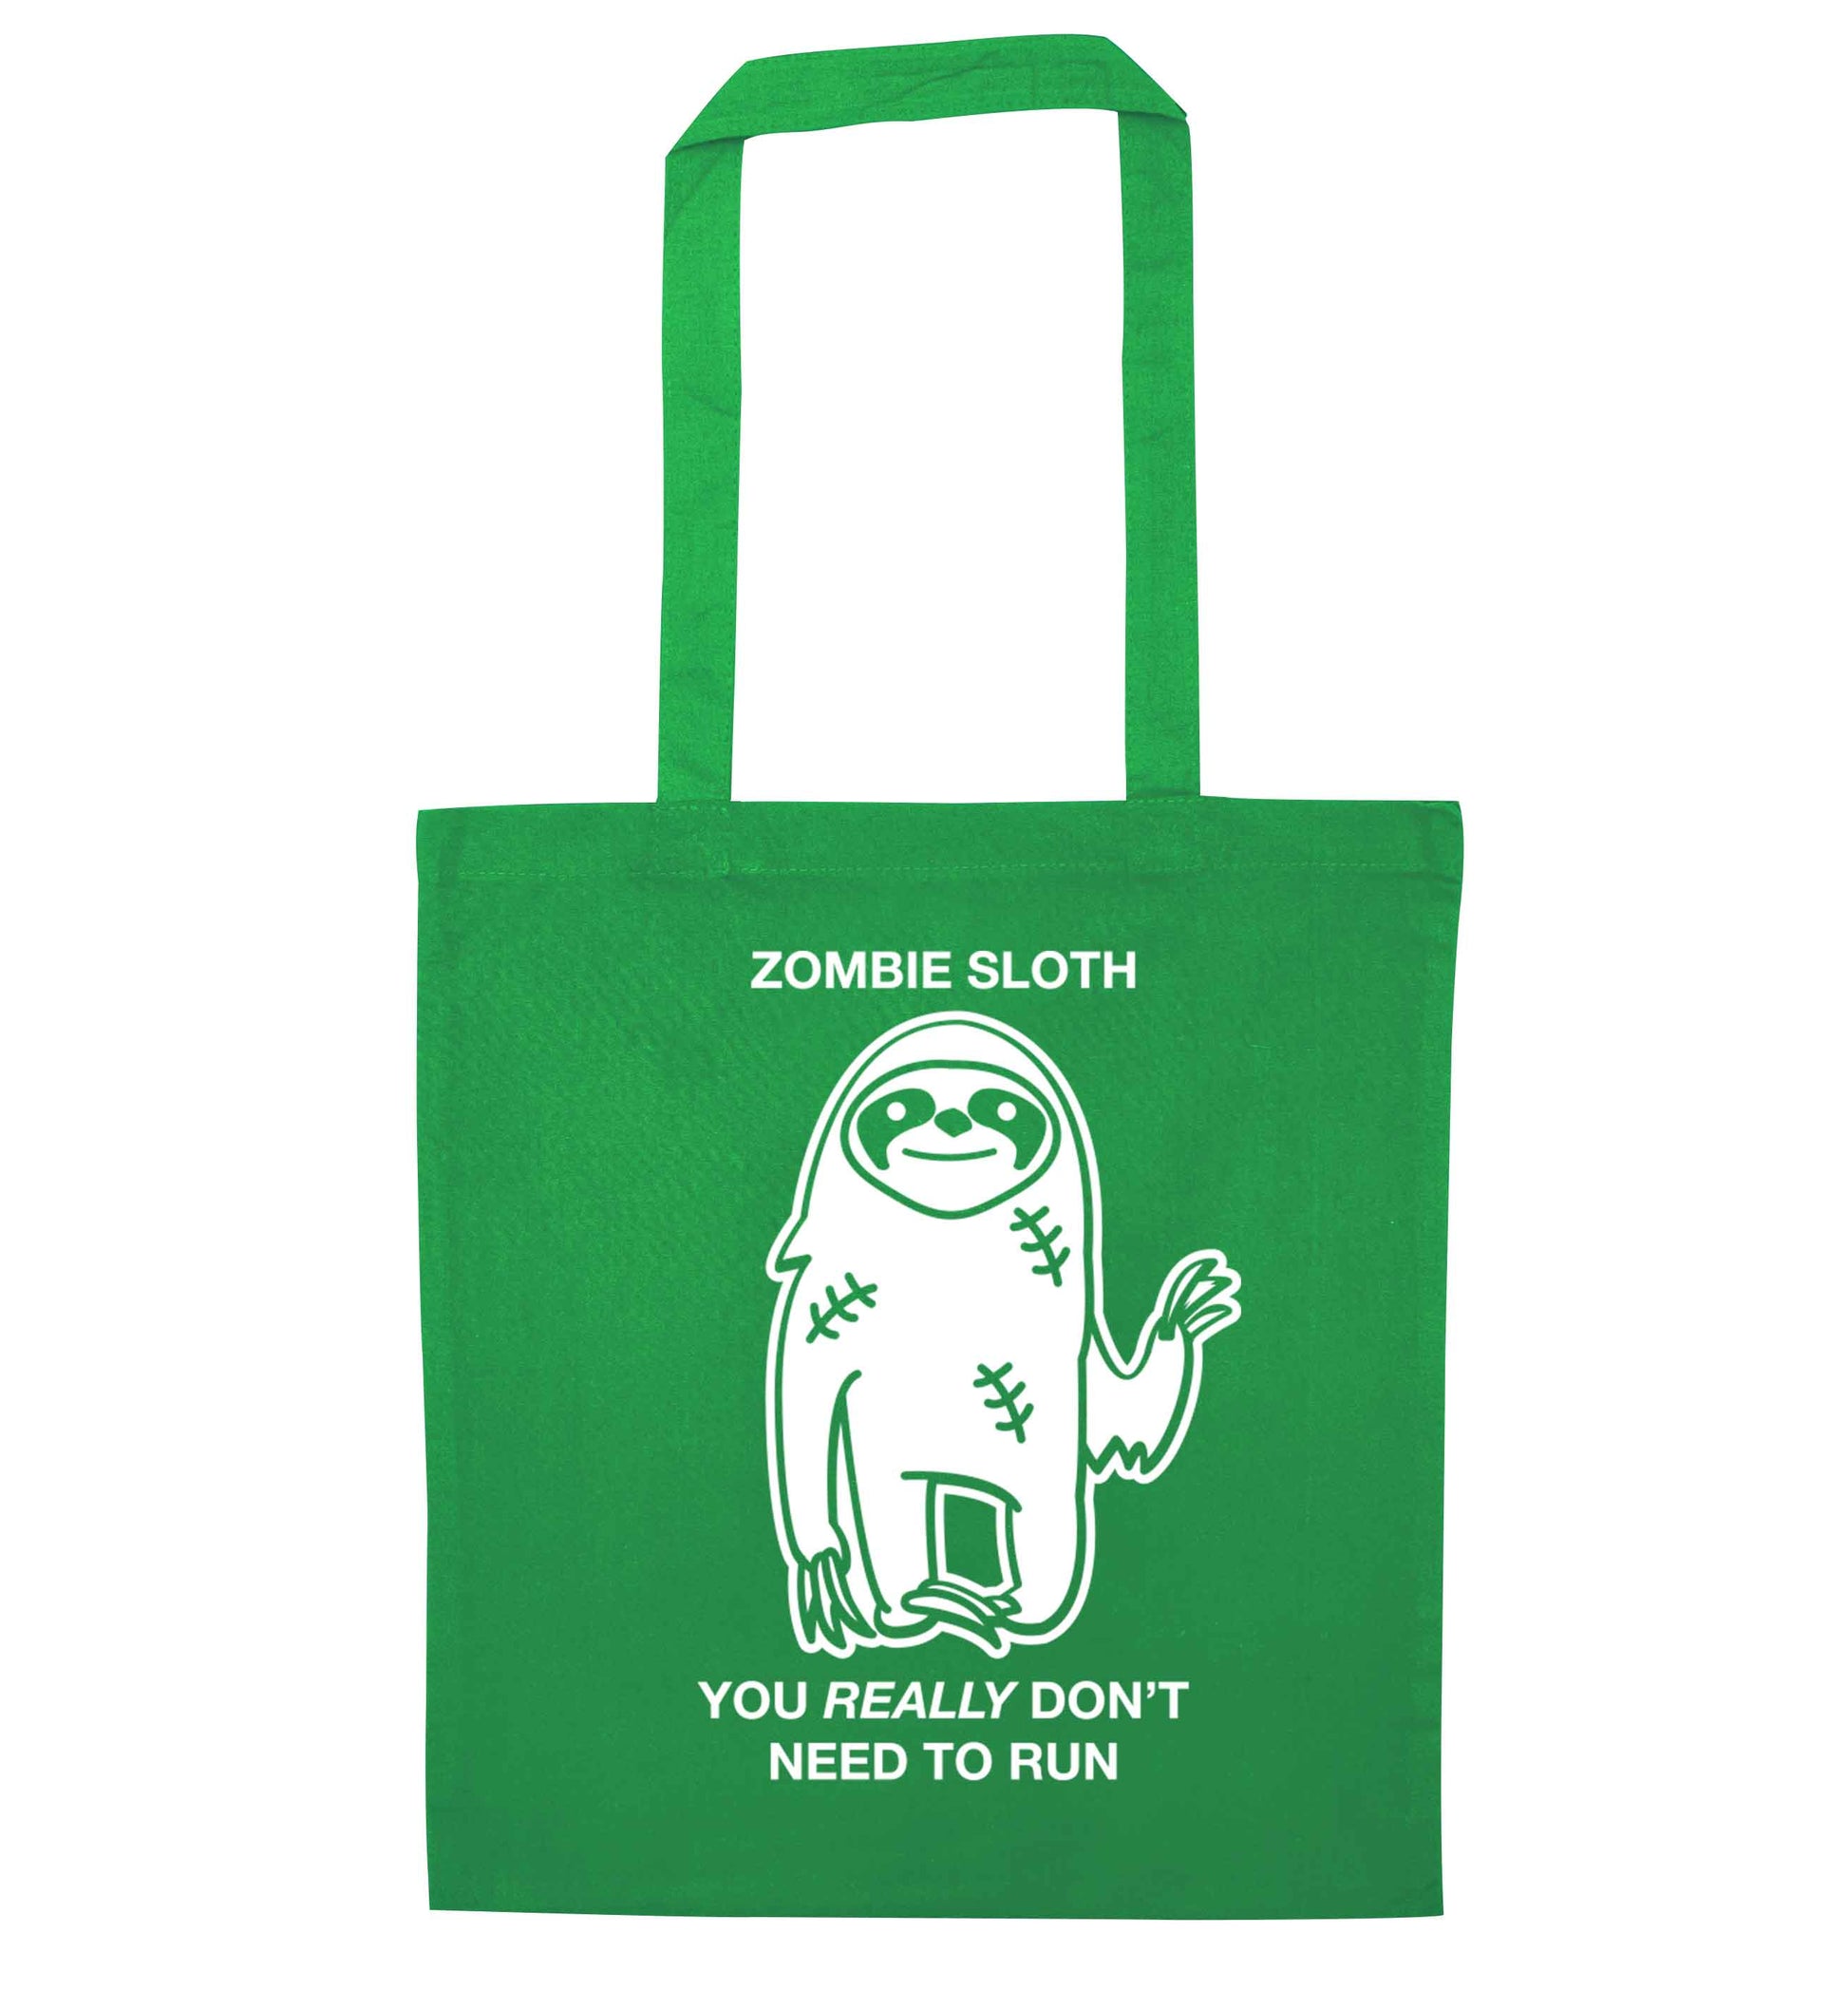 Zombie sloth you really don't need to run green tote bag